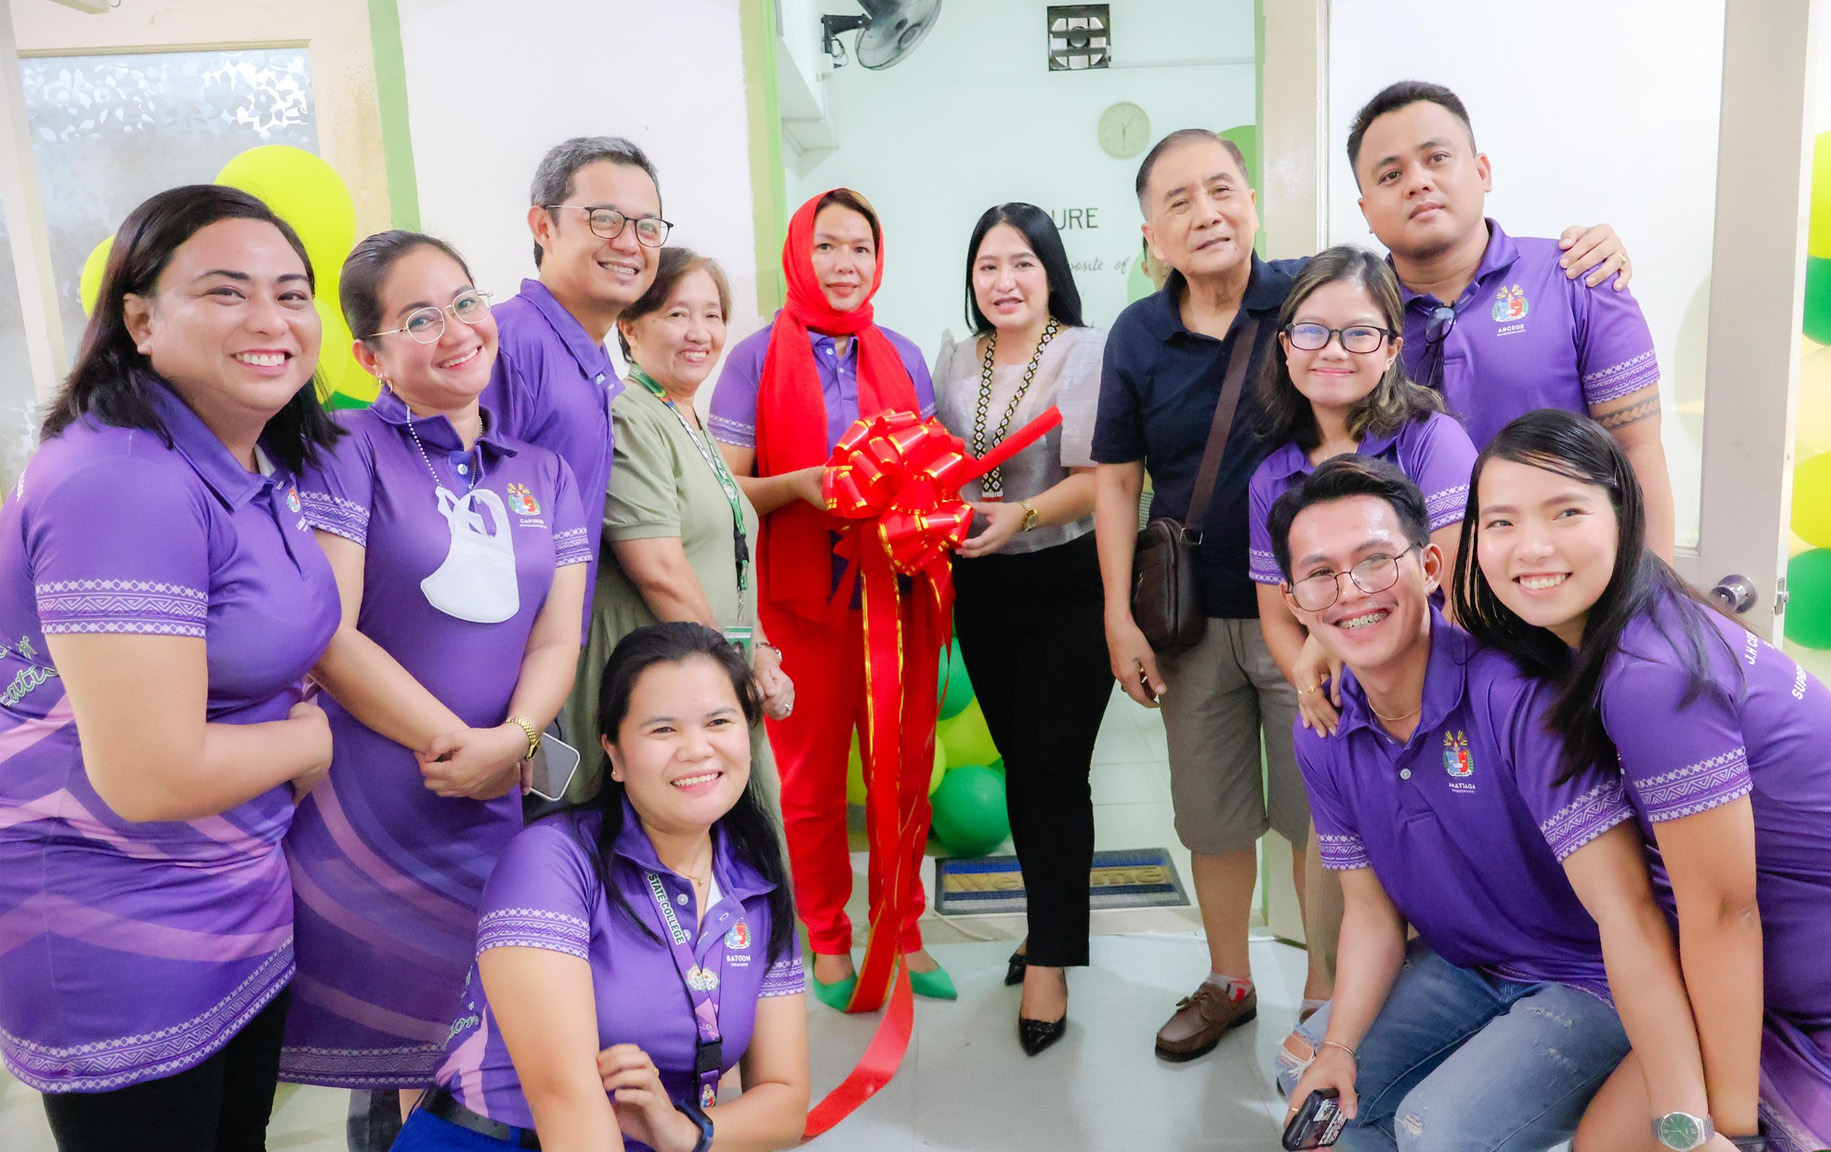 JHCSC School of Law Launches its Student Lounge to Prioritize Student Well-Being